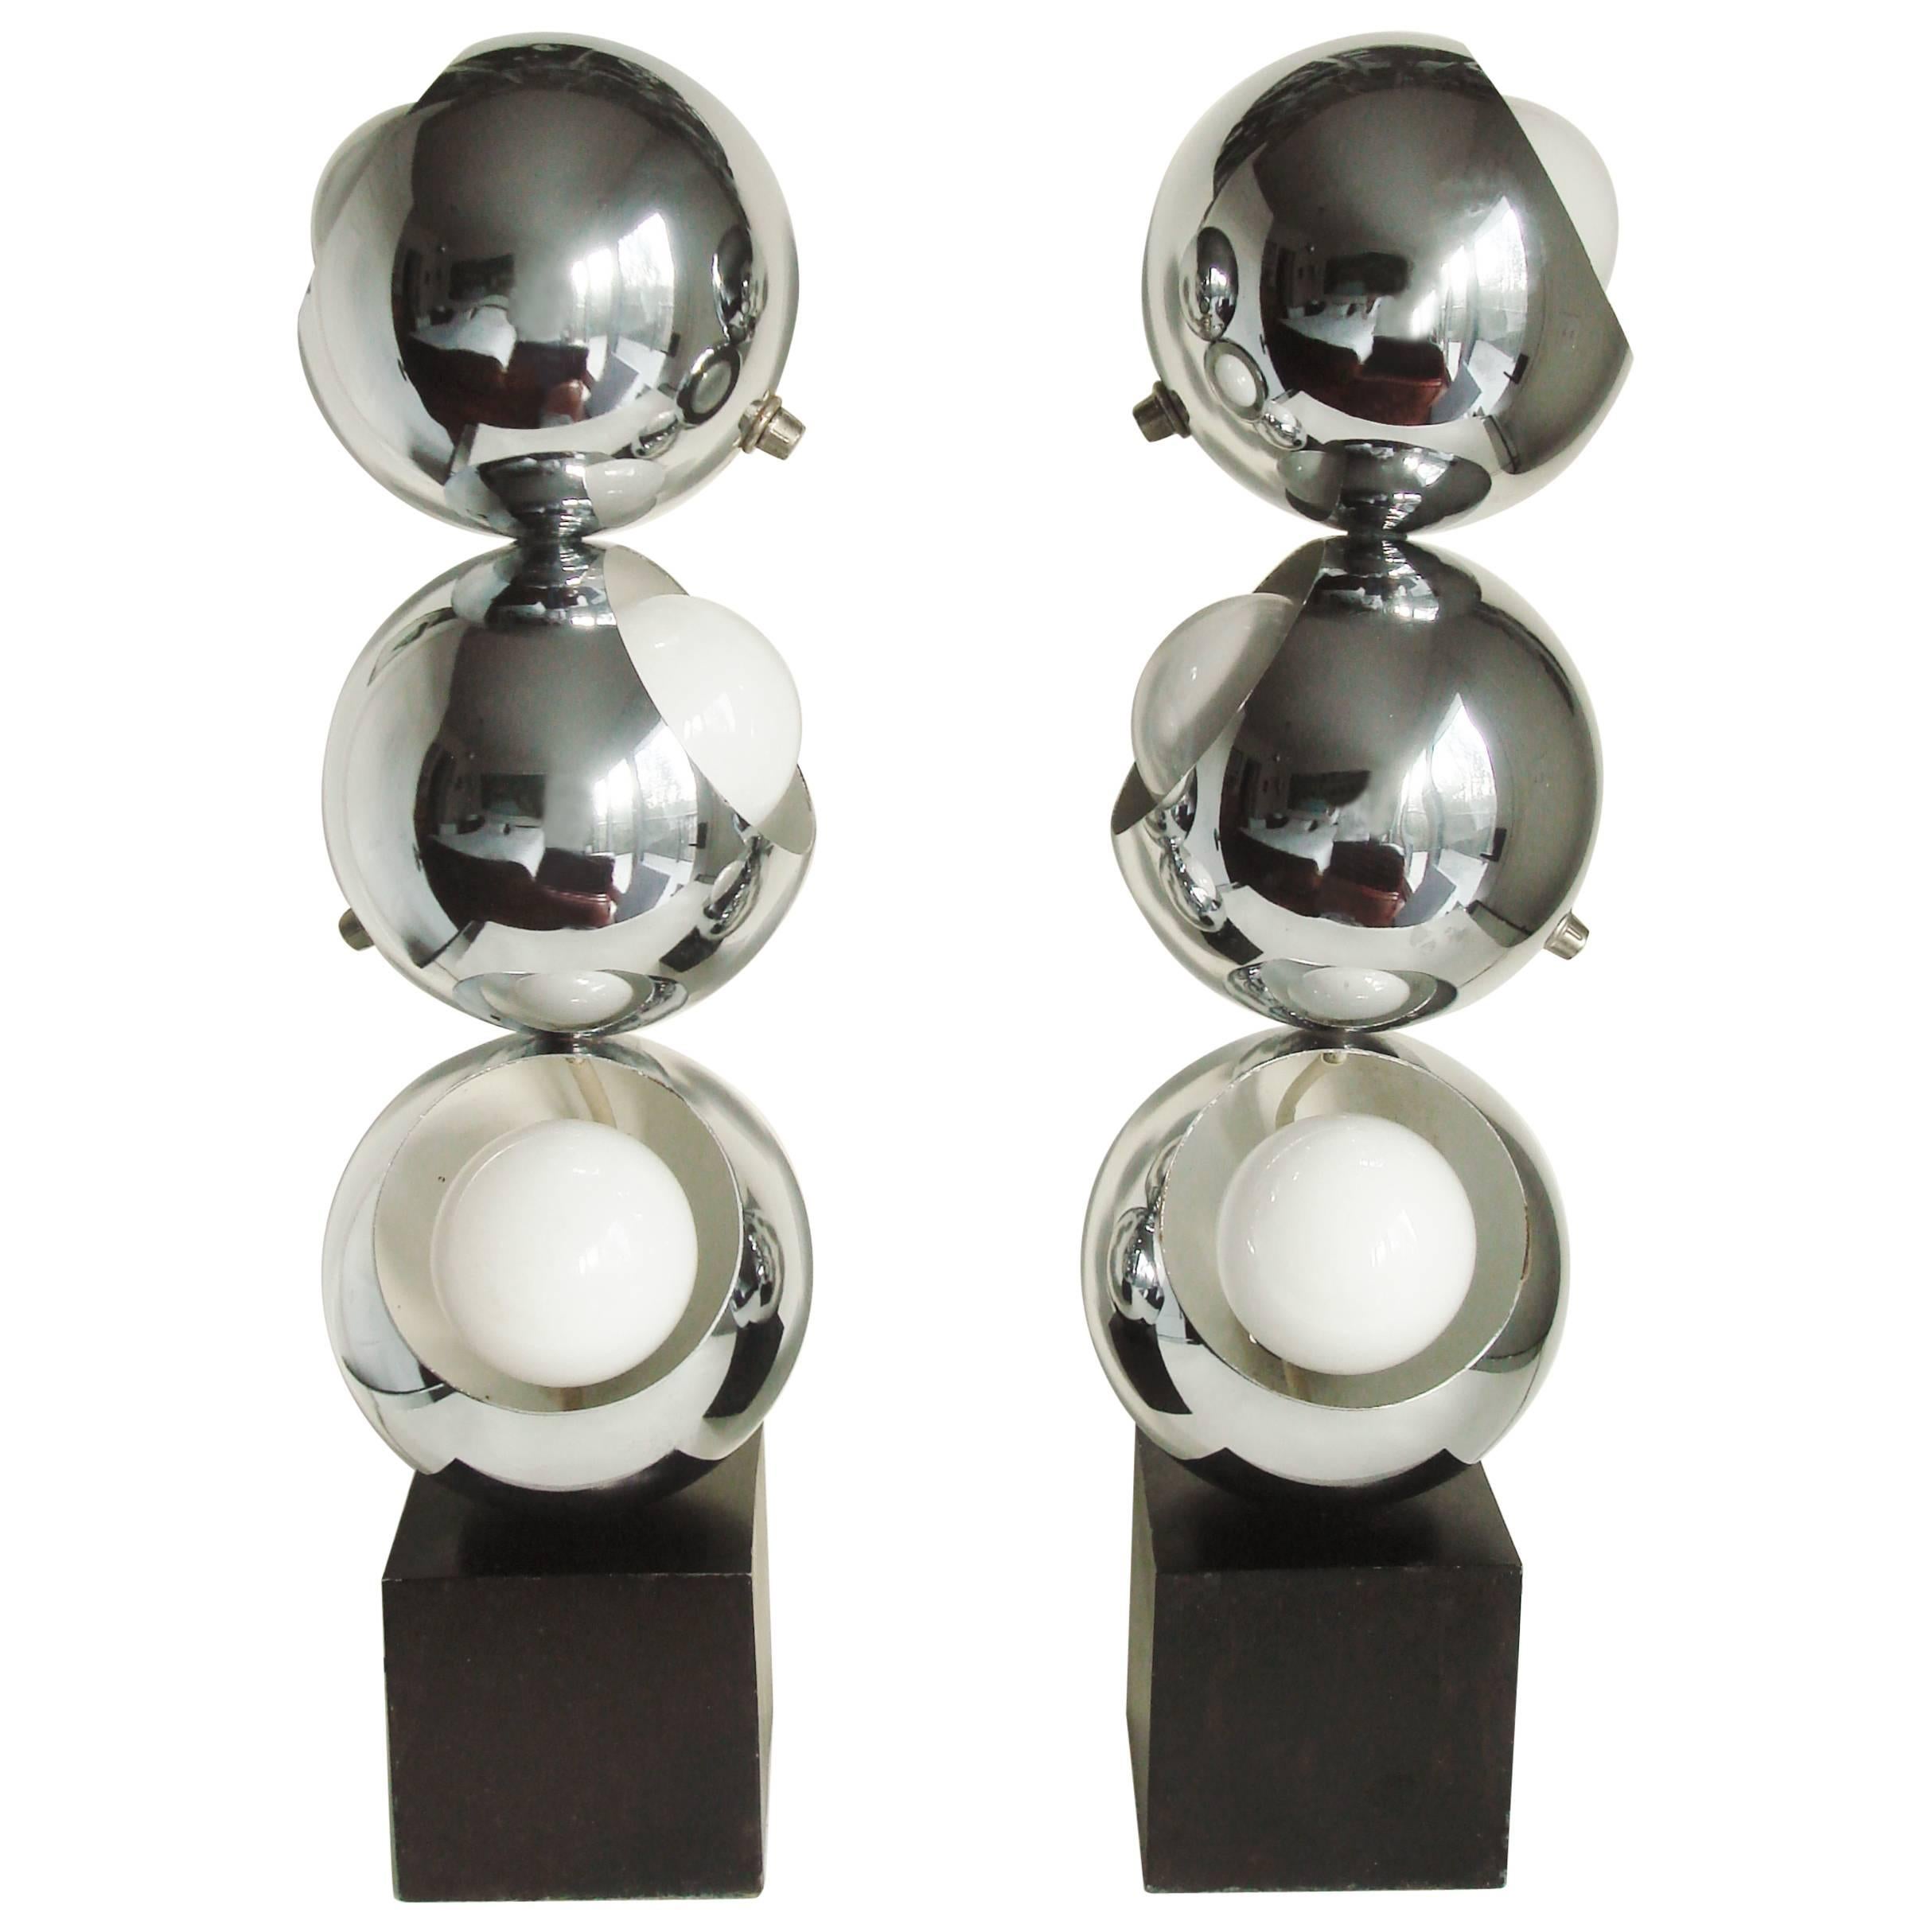 Bookmatched Pair of American 1960s Chrome and Black Enamel Triple Eyeball Lamps